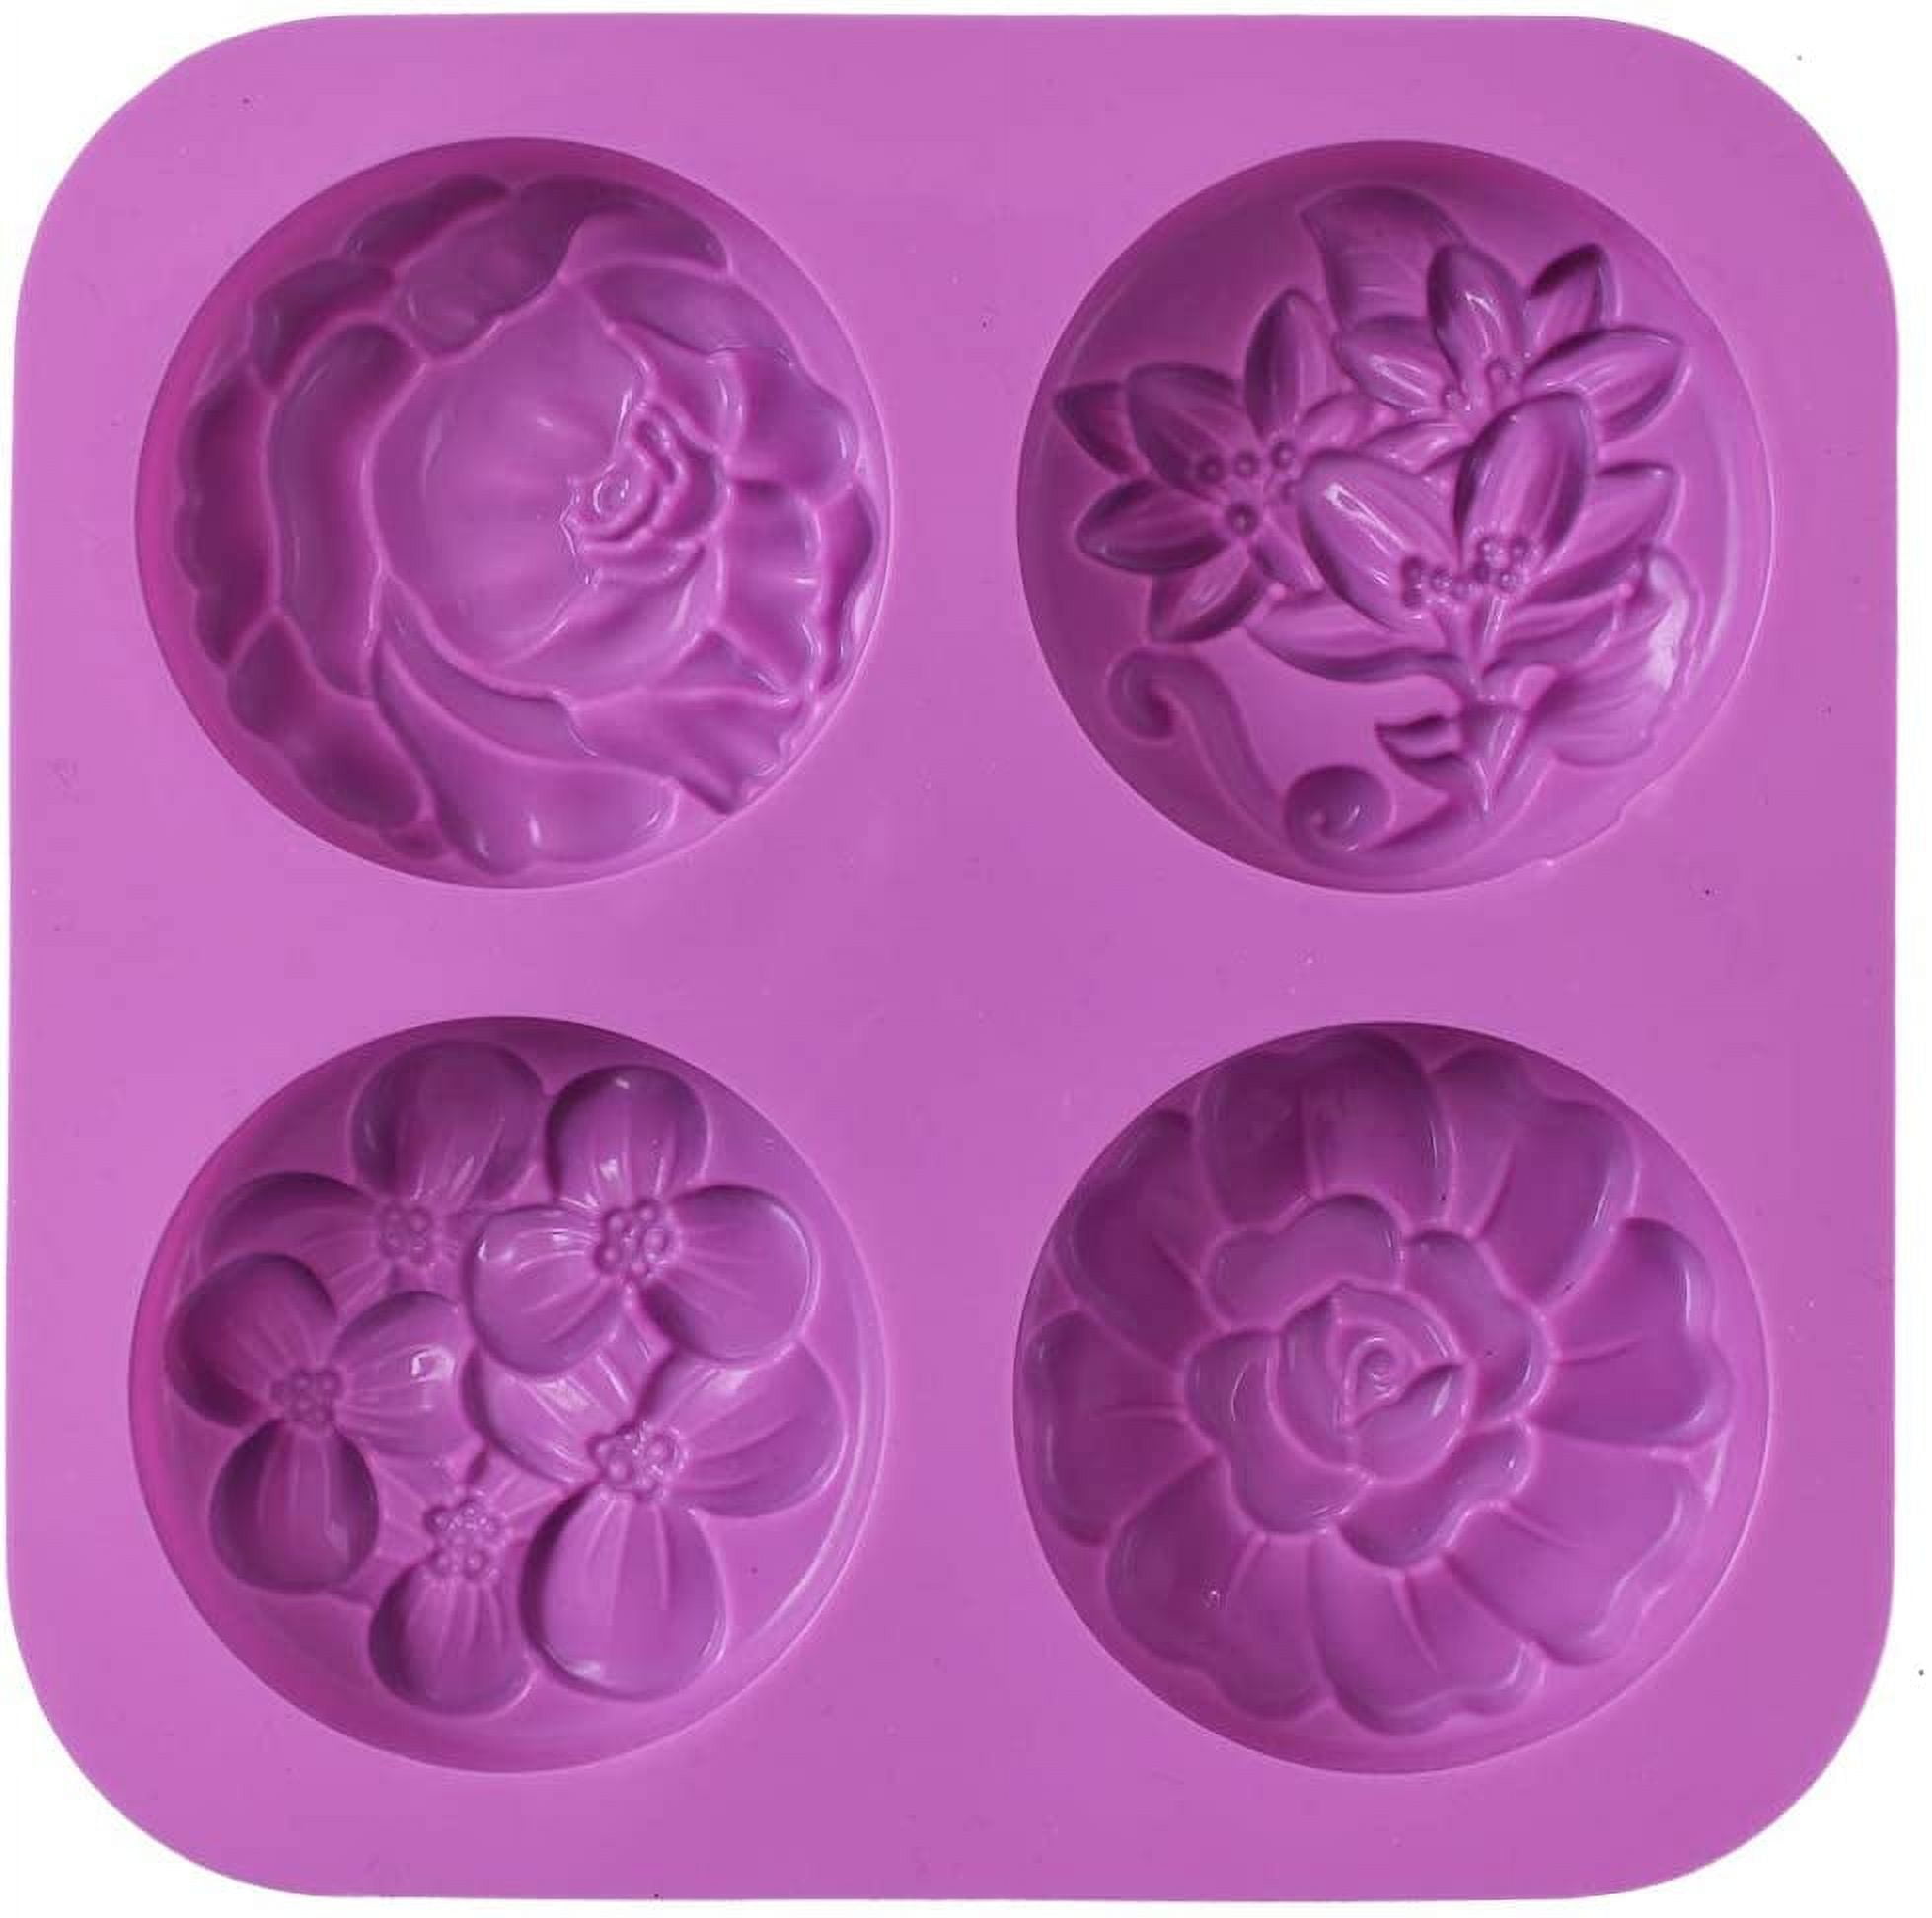 Silicone Soap Molds 8-Cavity Flat Round Soap Making Molds Non-Stick  Silicone Molds DIY Handmade Silicone Mold for Soap Making Pudding Chocolate  Cakes Jelly Dome Mousse 